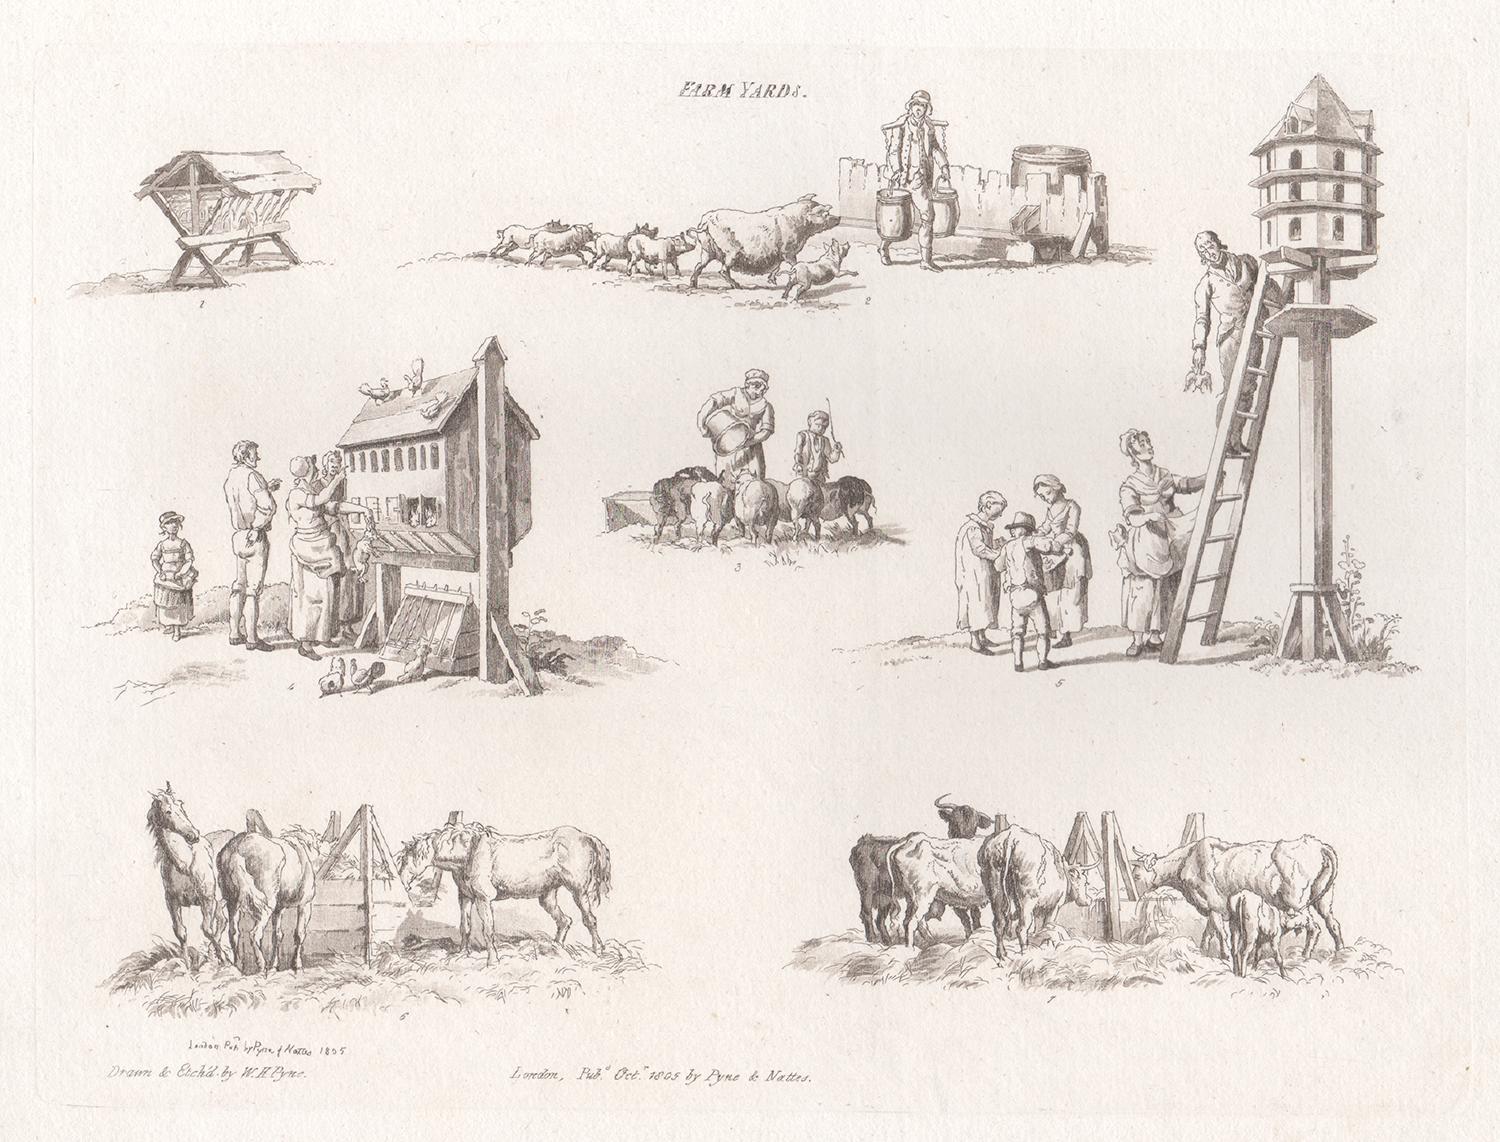 William Henry Pyne Figurative Print - Farm Yards, early 19th century sepia soft ground etching, 1805